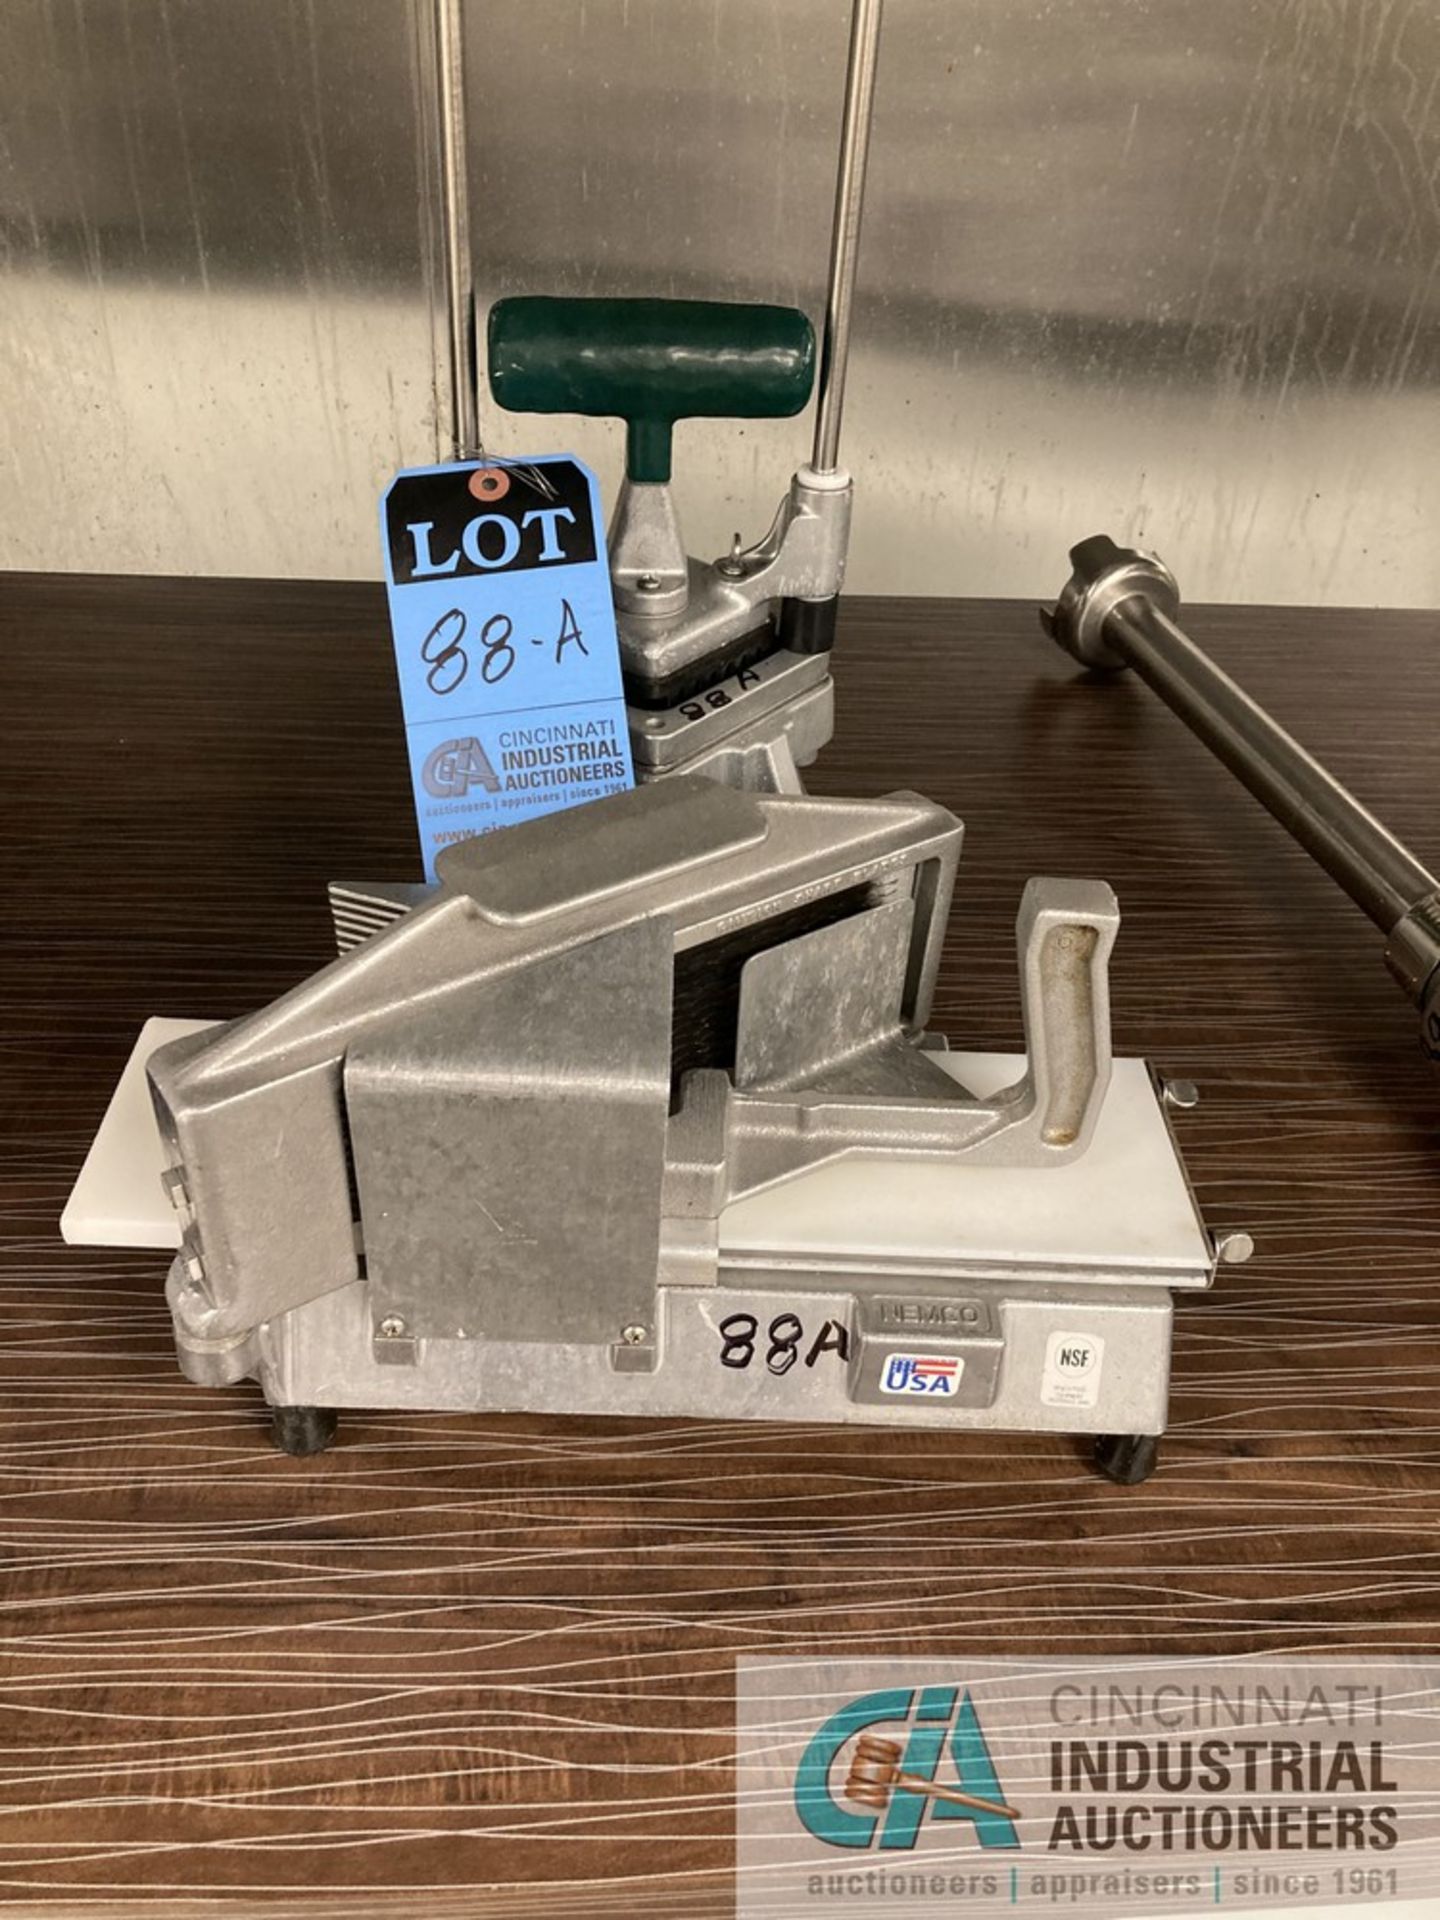 (LOT) NEMCO TOMATO SLICER AND FRENCH FRY CUTTER **For convenience, the loading fee of $50.00 will be